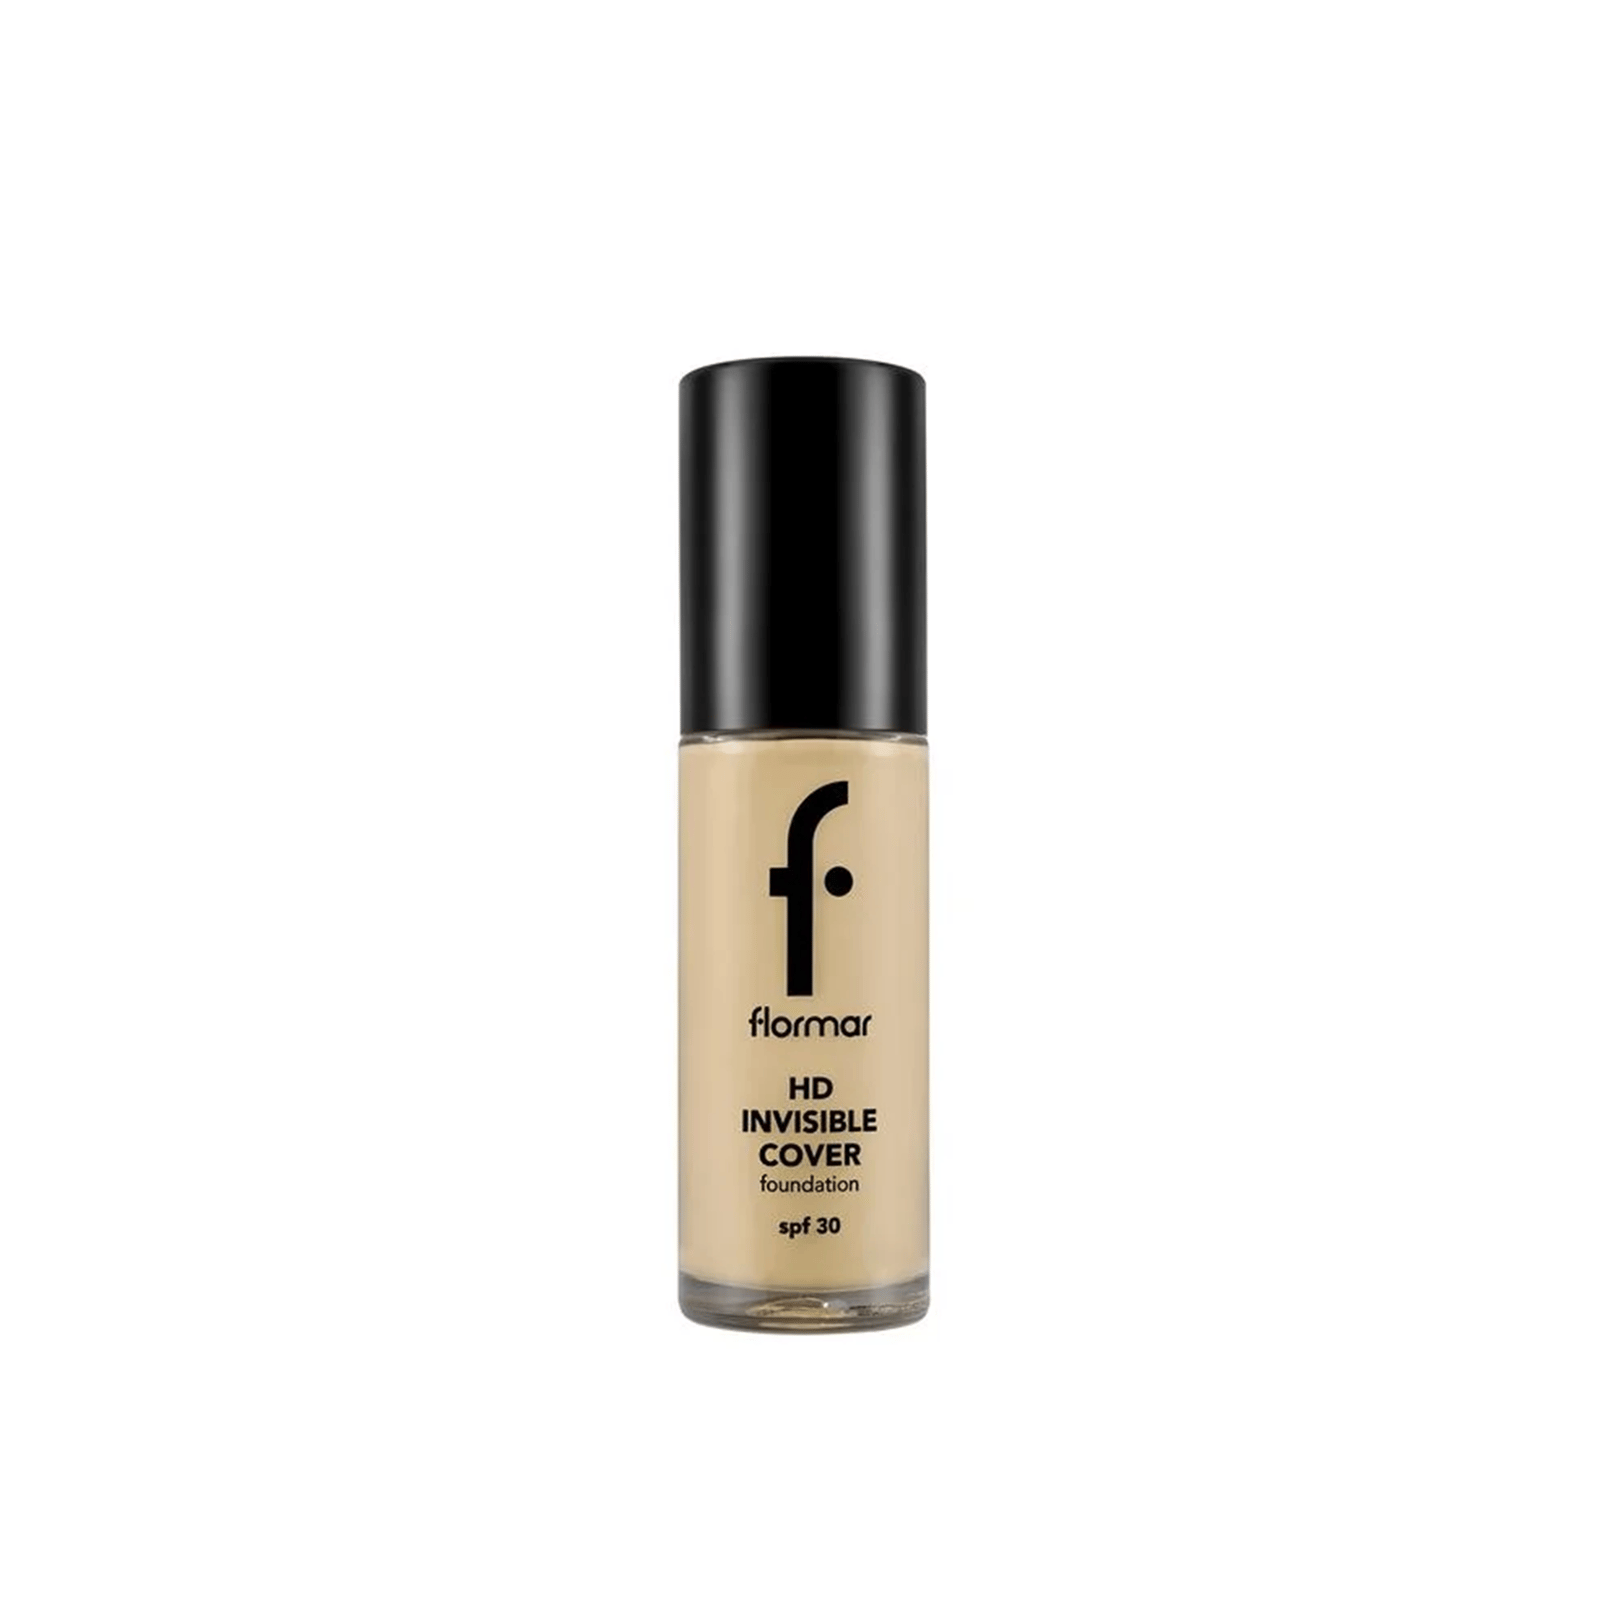 Flormar Invisible Cover HD Foundation SPF30 60 Ivory 30ml (1.01floz)